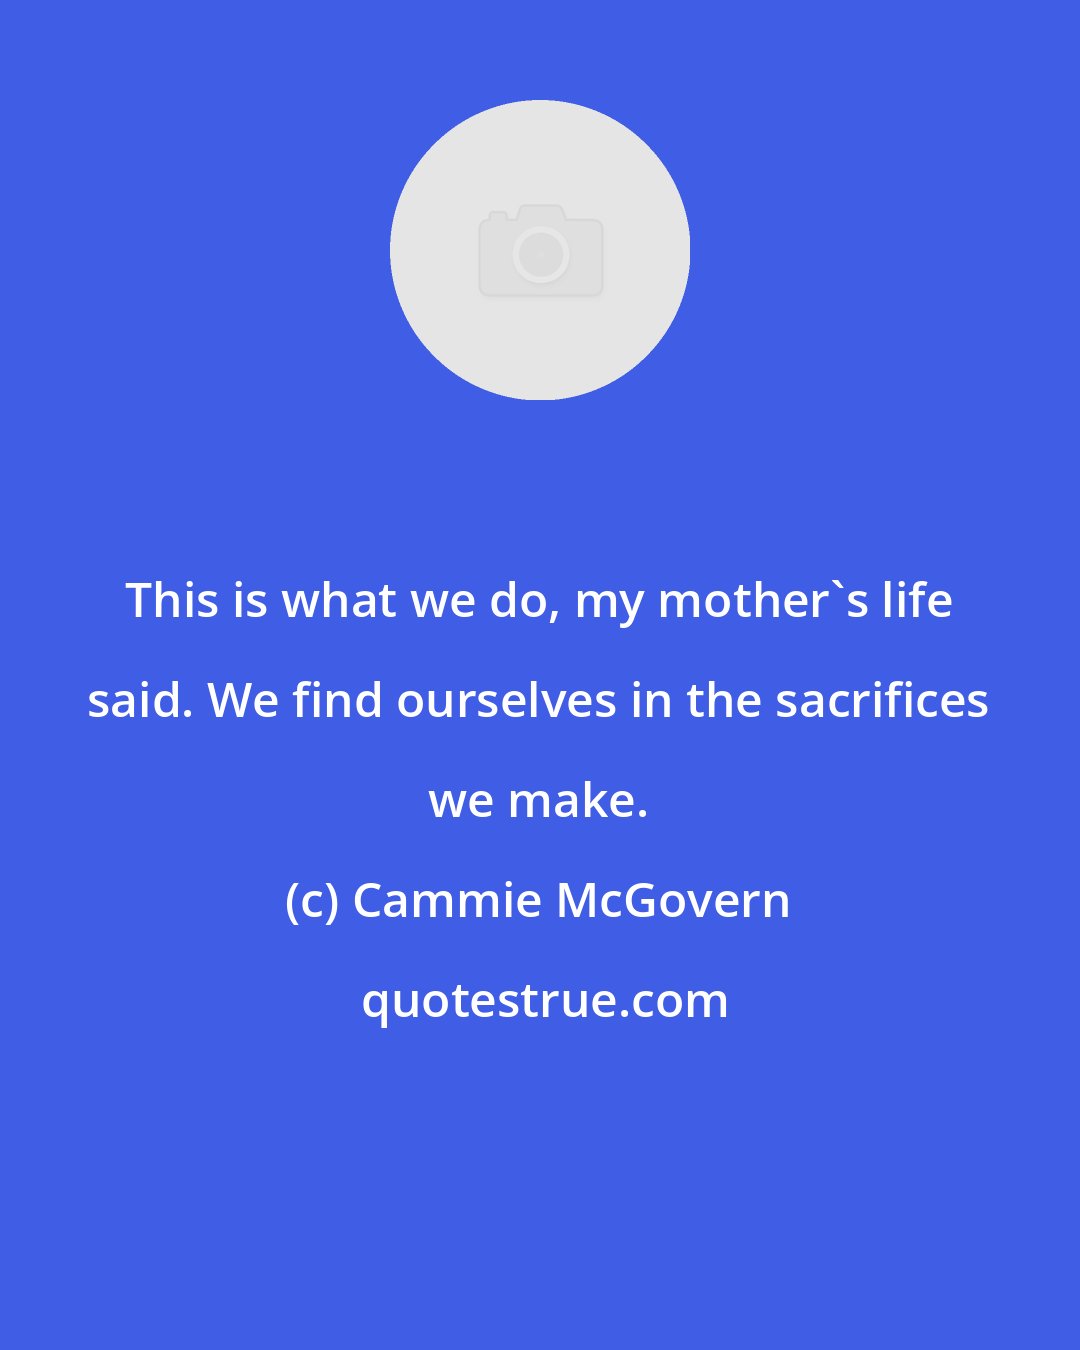 Cammie McGovern: This is what we do, my mother's life said. We find ourselves in the sacrifices we make.